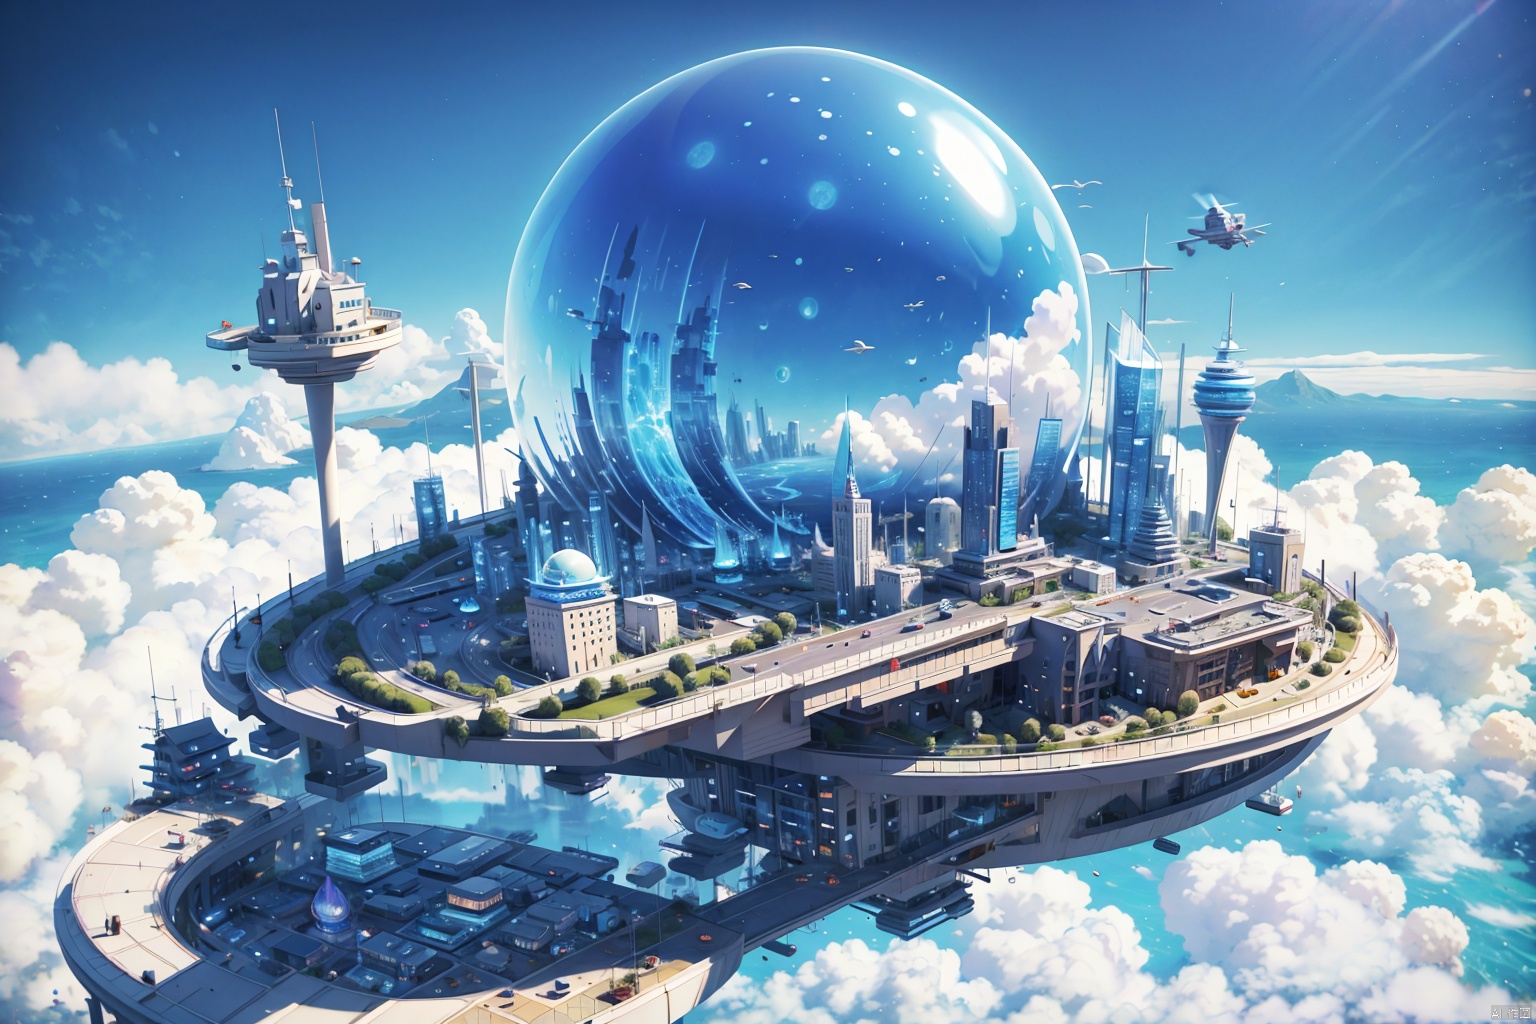 FantacyWorld,(cities floating in the sky:1.2),high in the clouds,precision mechanical device,air vehicle,environmental concept art,mystery,cg scene design,3D,large scene,epic feeling,strong contrast between light and dark,dreamy,, Realistic style, 3D rendering, architectural photography, masterclass work, high quality, ultra-high details, 8K, HD